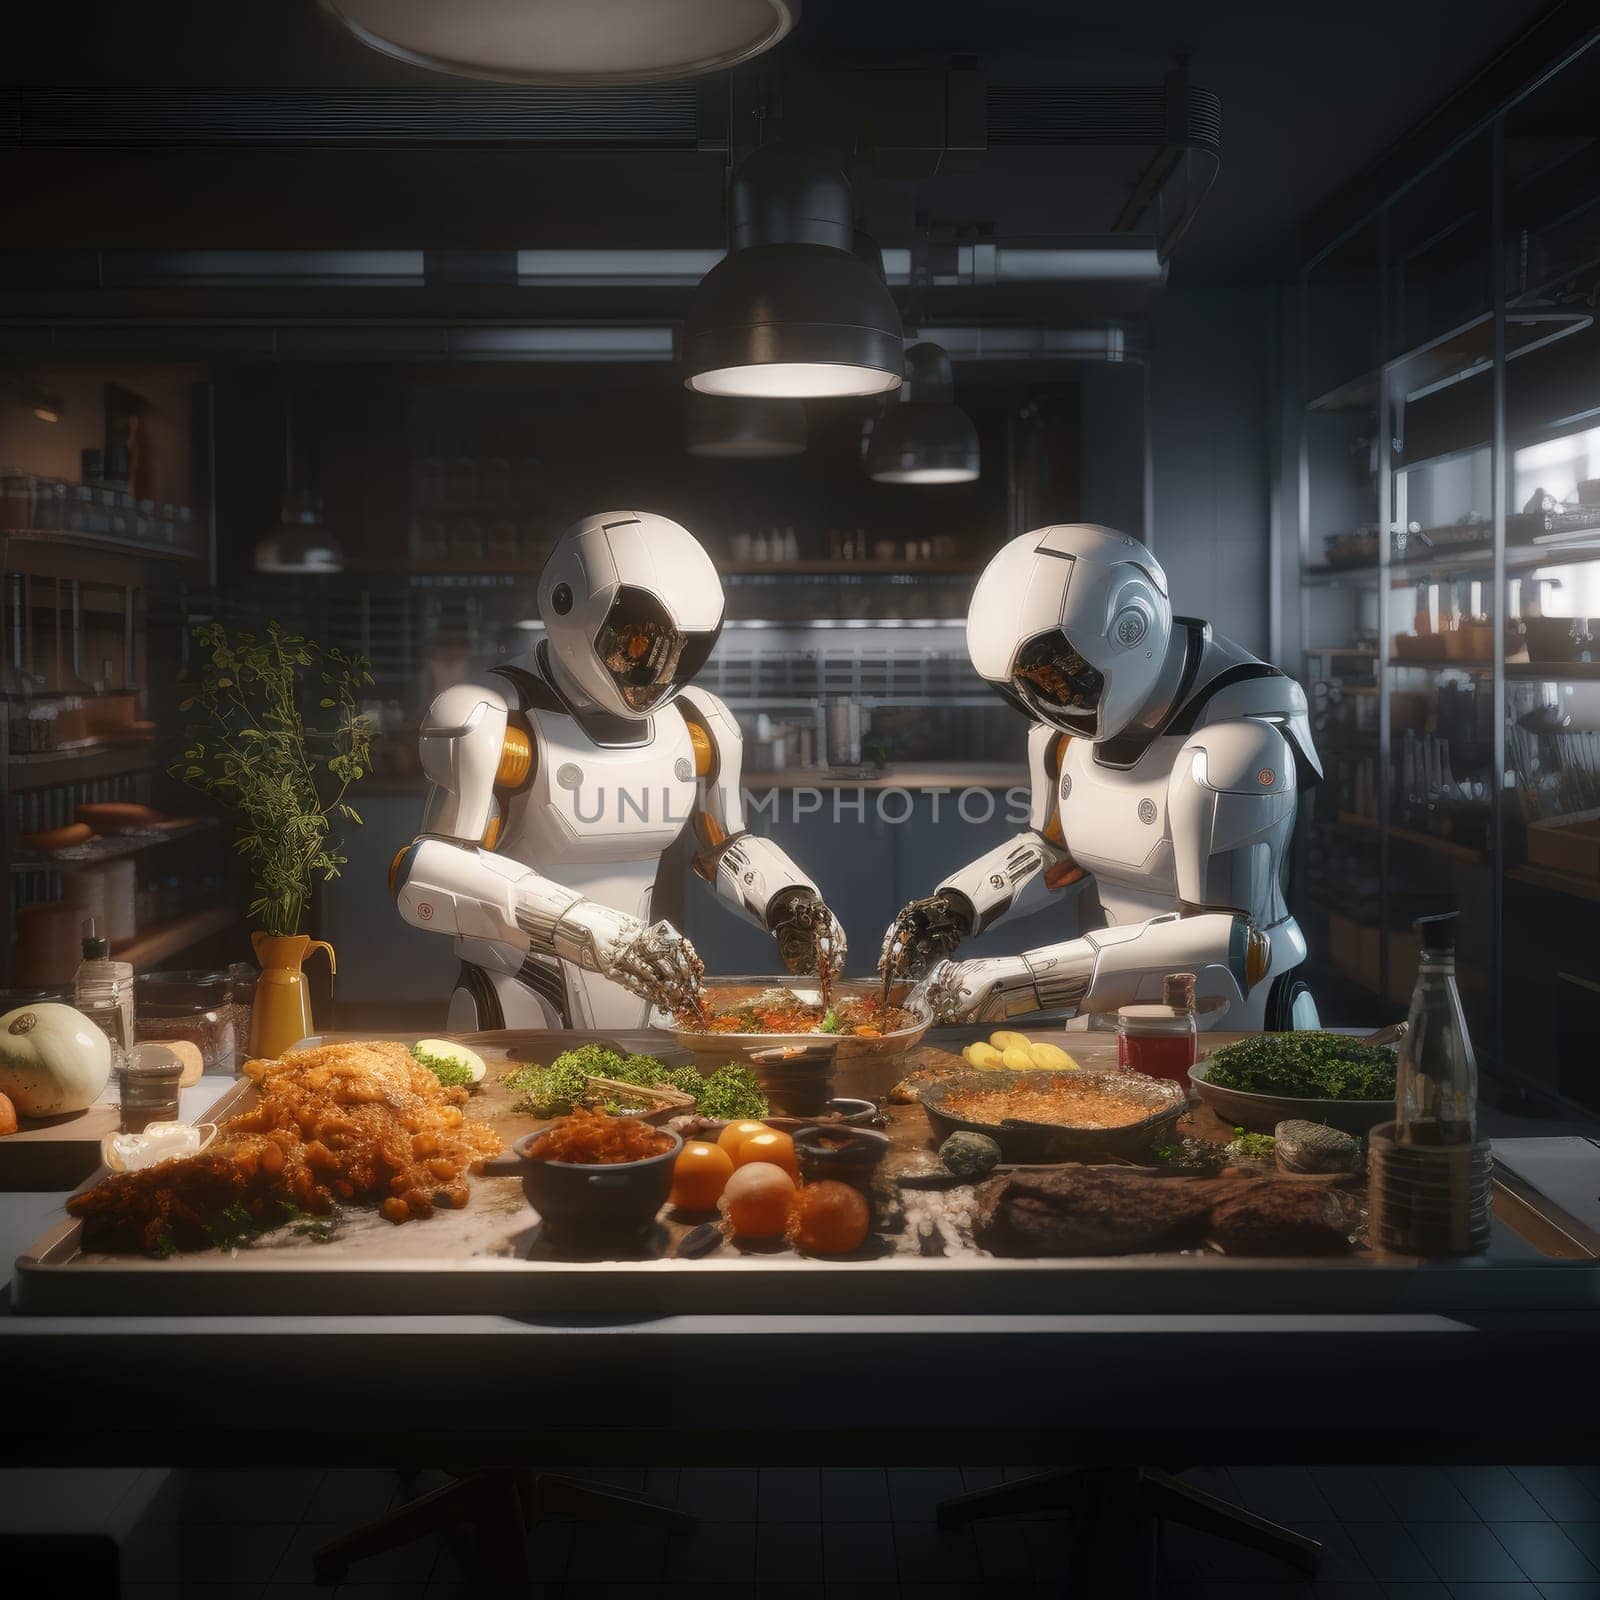 Two robots preparing food in the kitchen by cherezoff